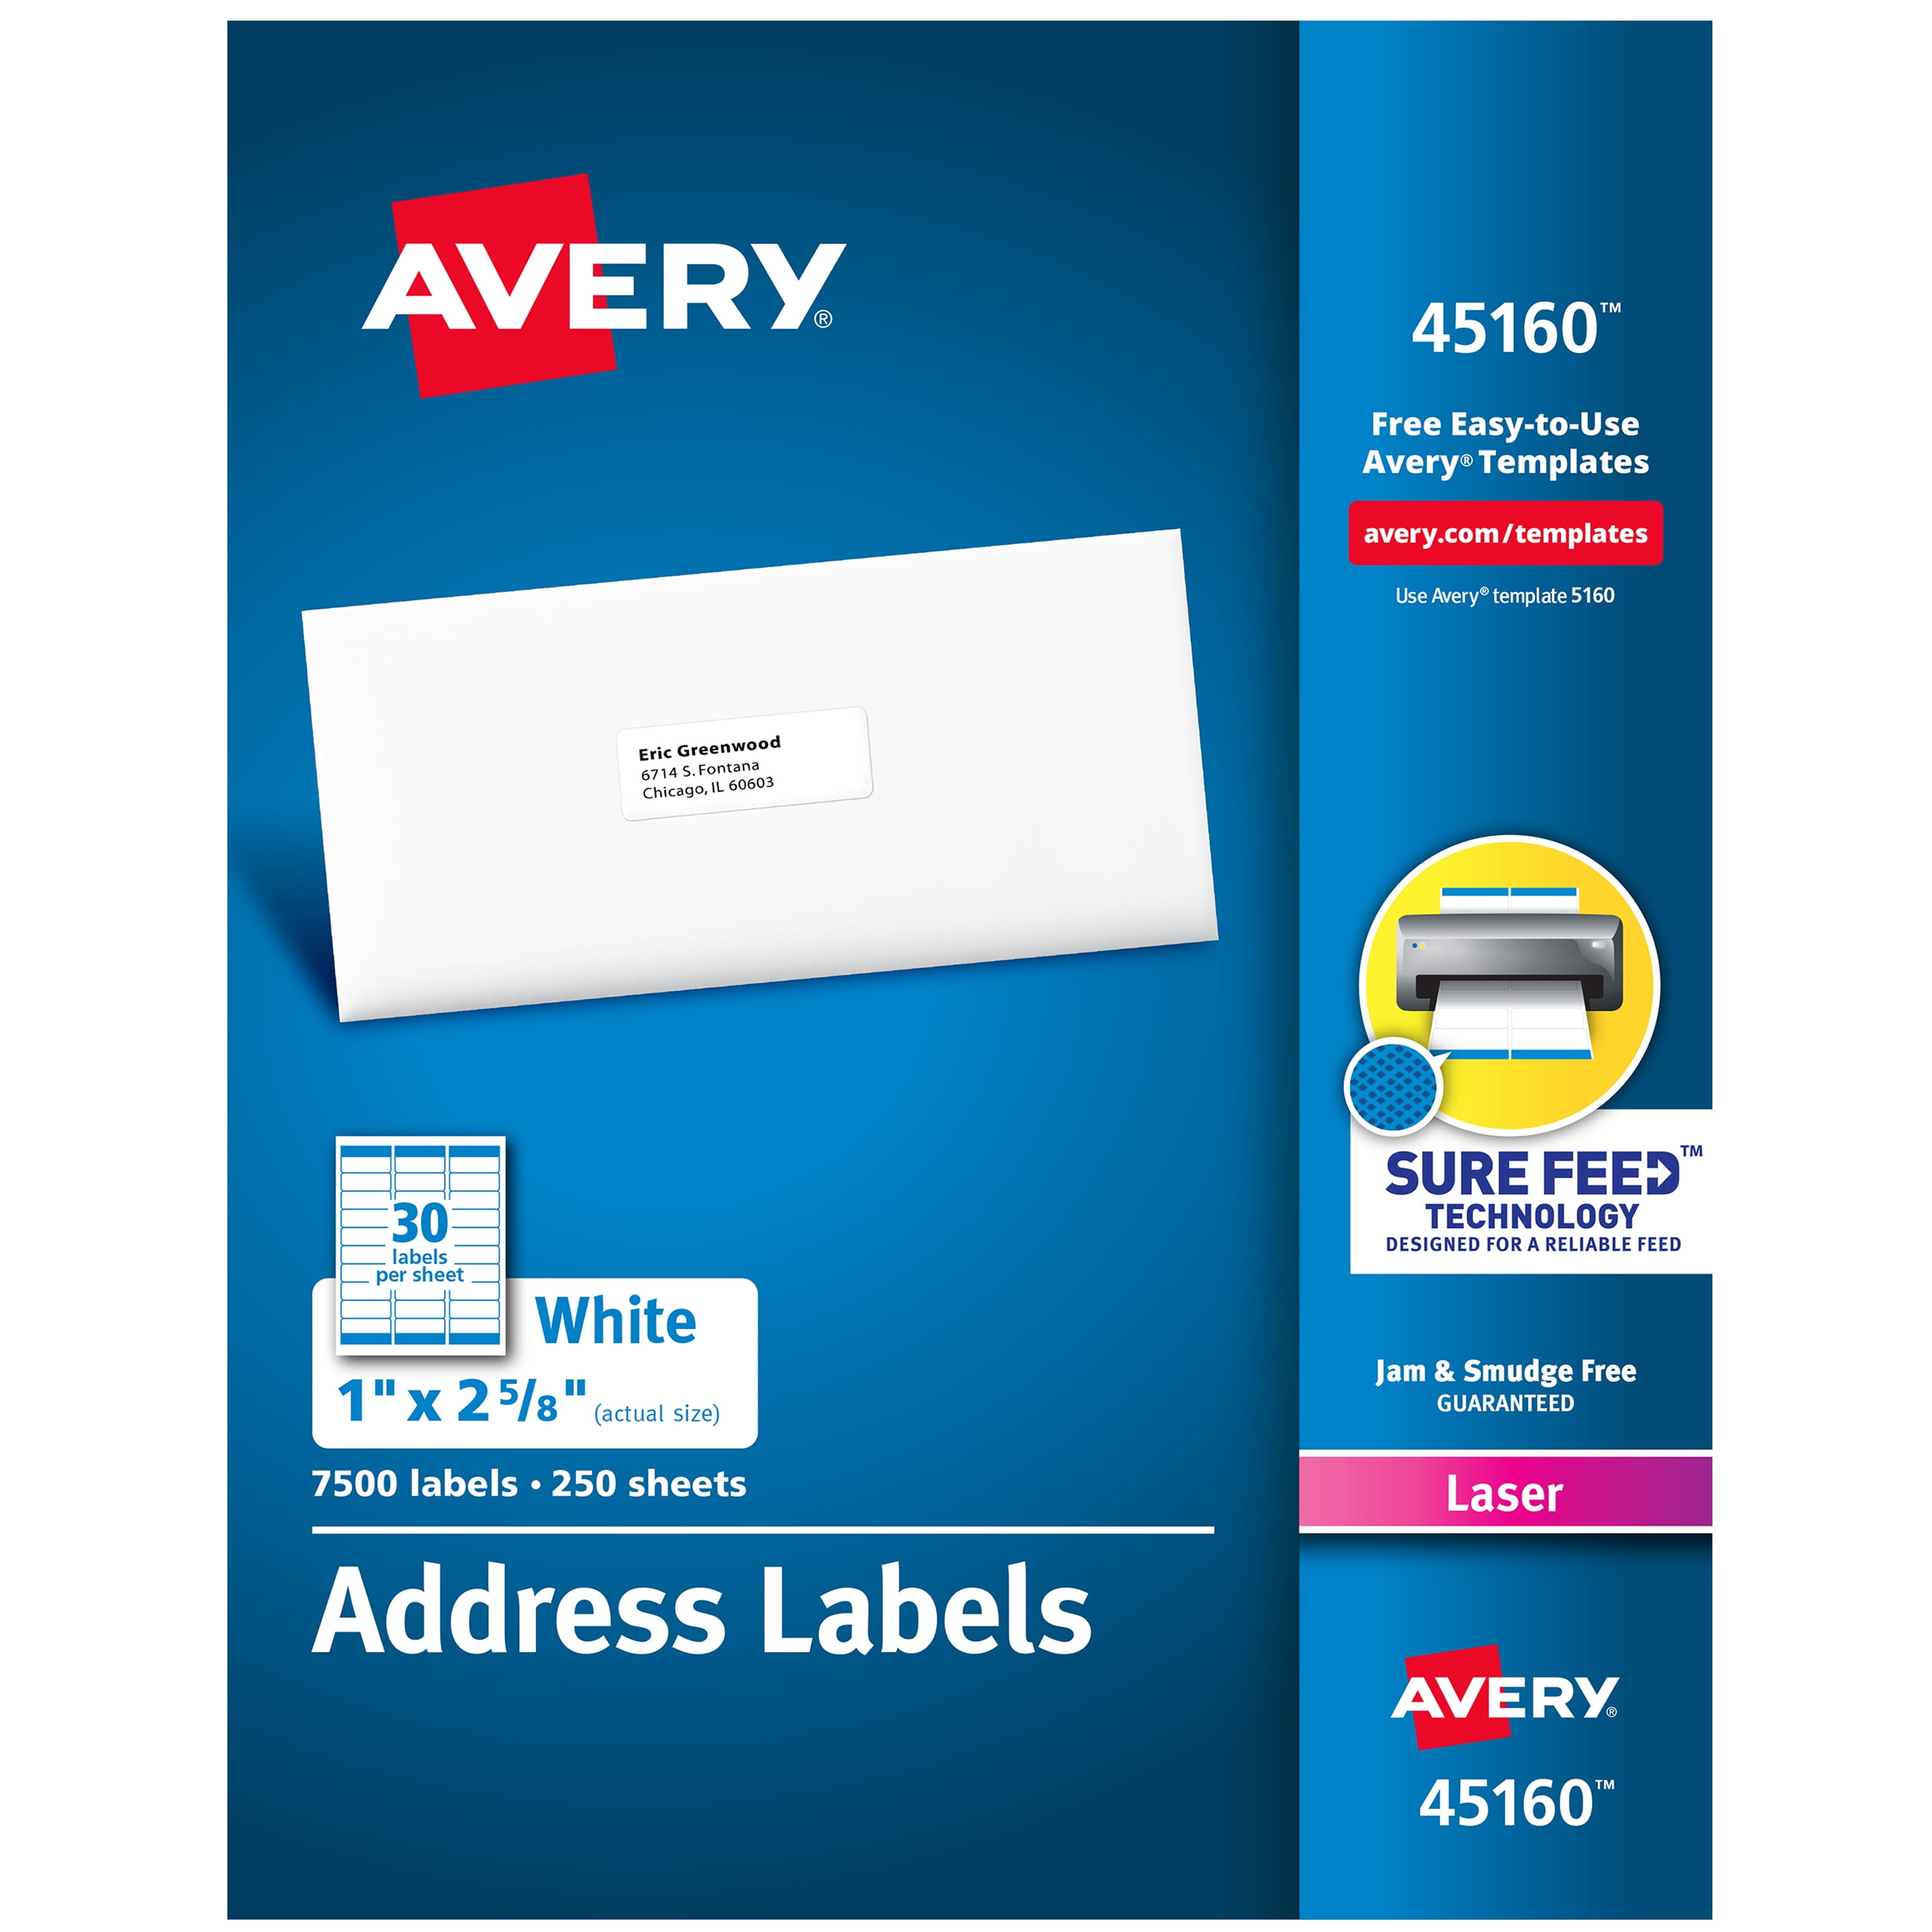 WHITE Adhesive Sale Labels 1-5/8" x 1-1/8" Rectangle "SPECIAL" U write 50 RED 